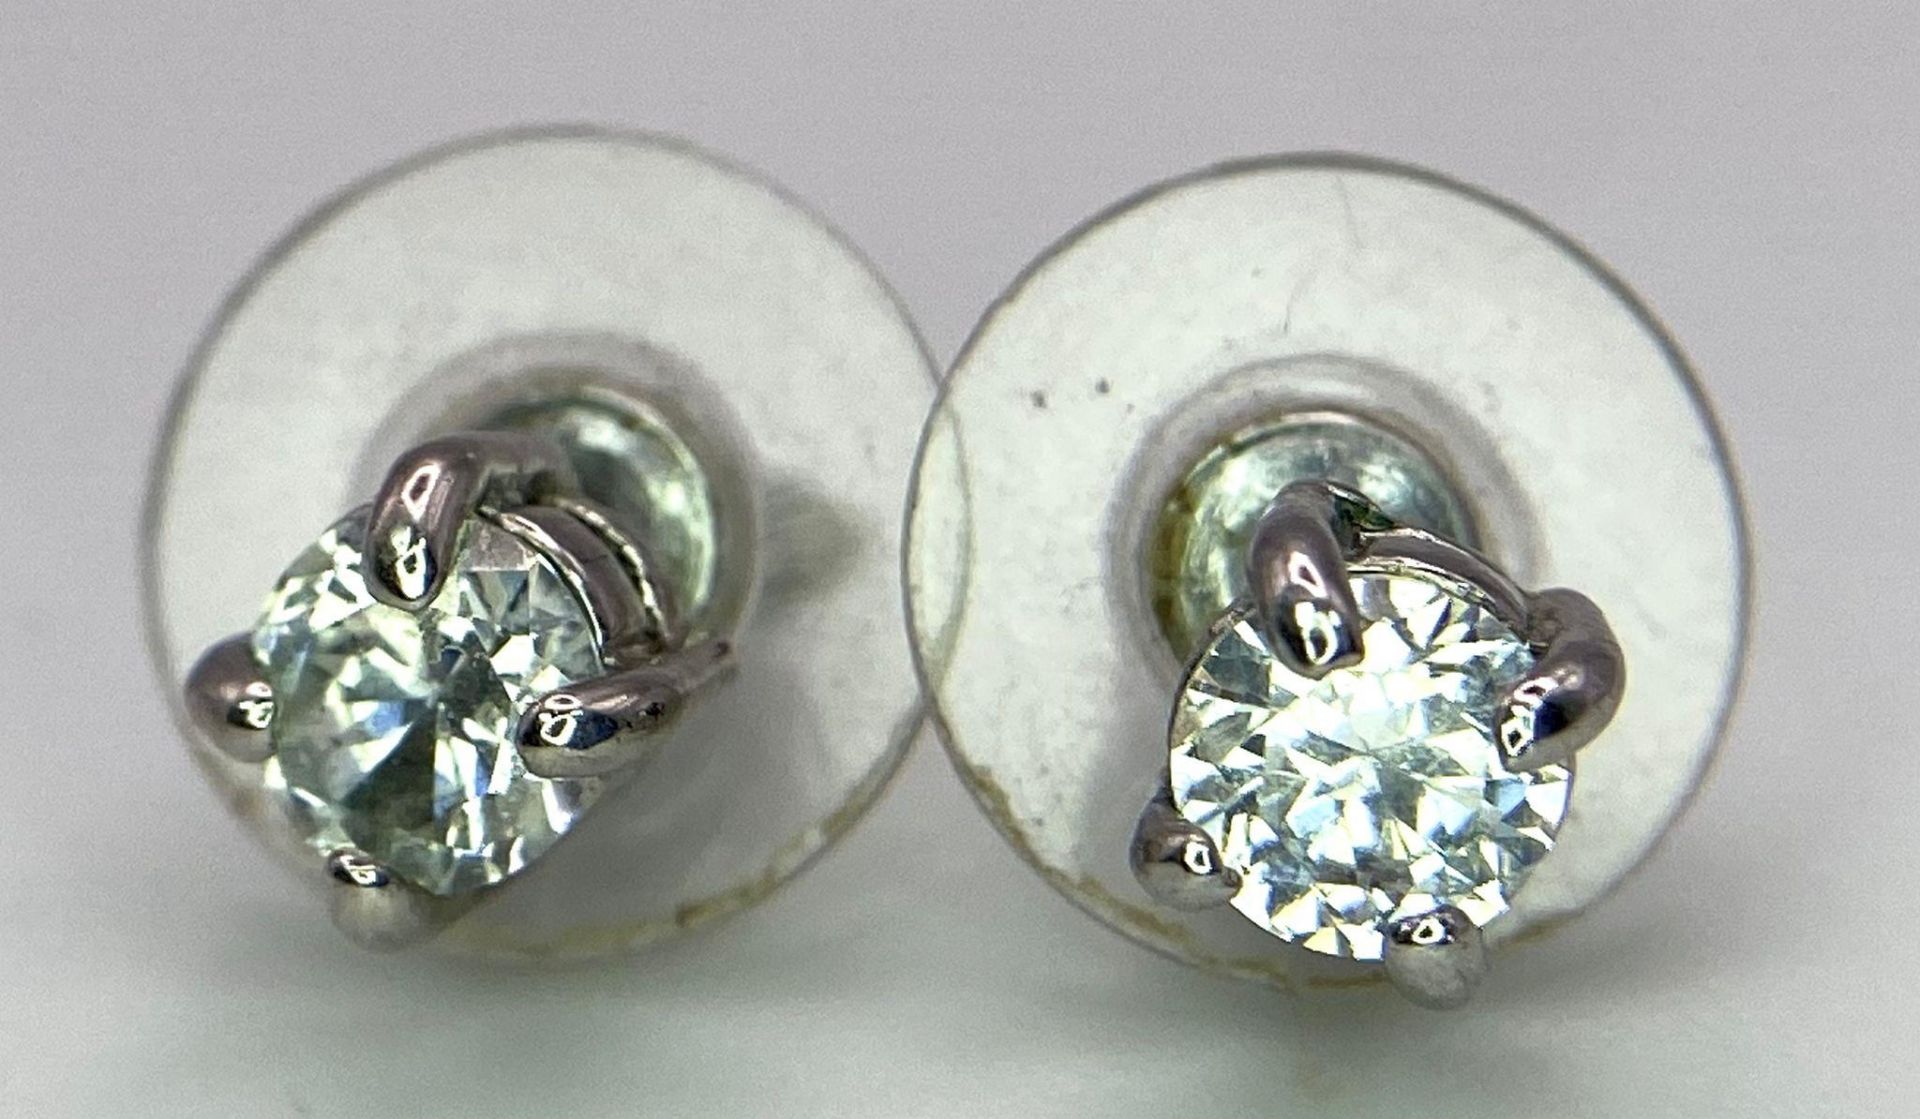 A Pair of White CZ Stone Stud Earrings. - Image 2 of 3